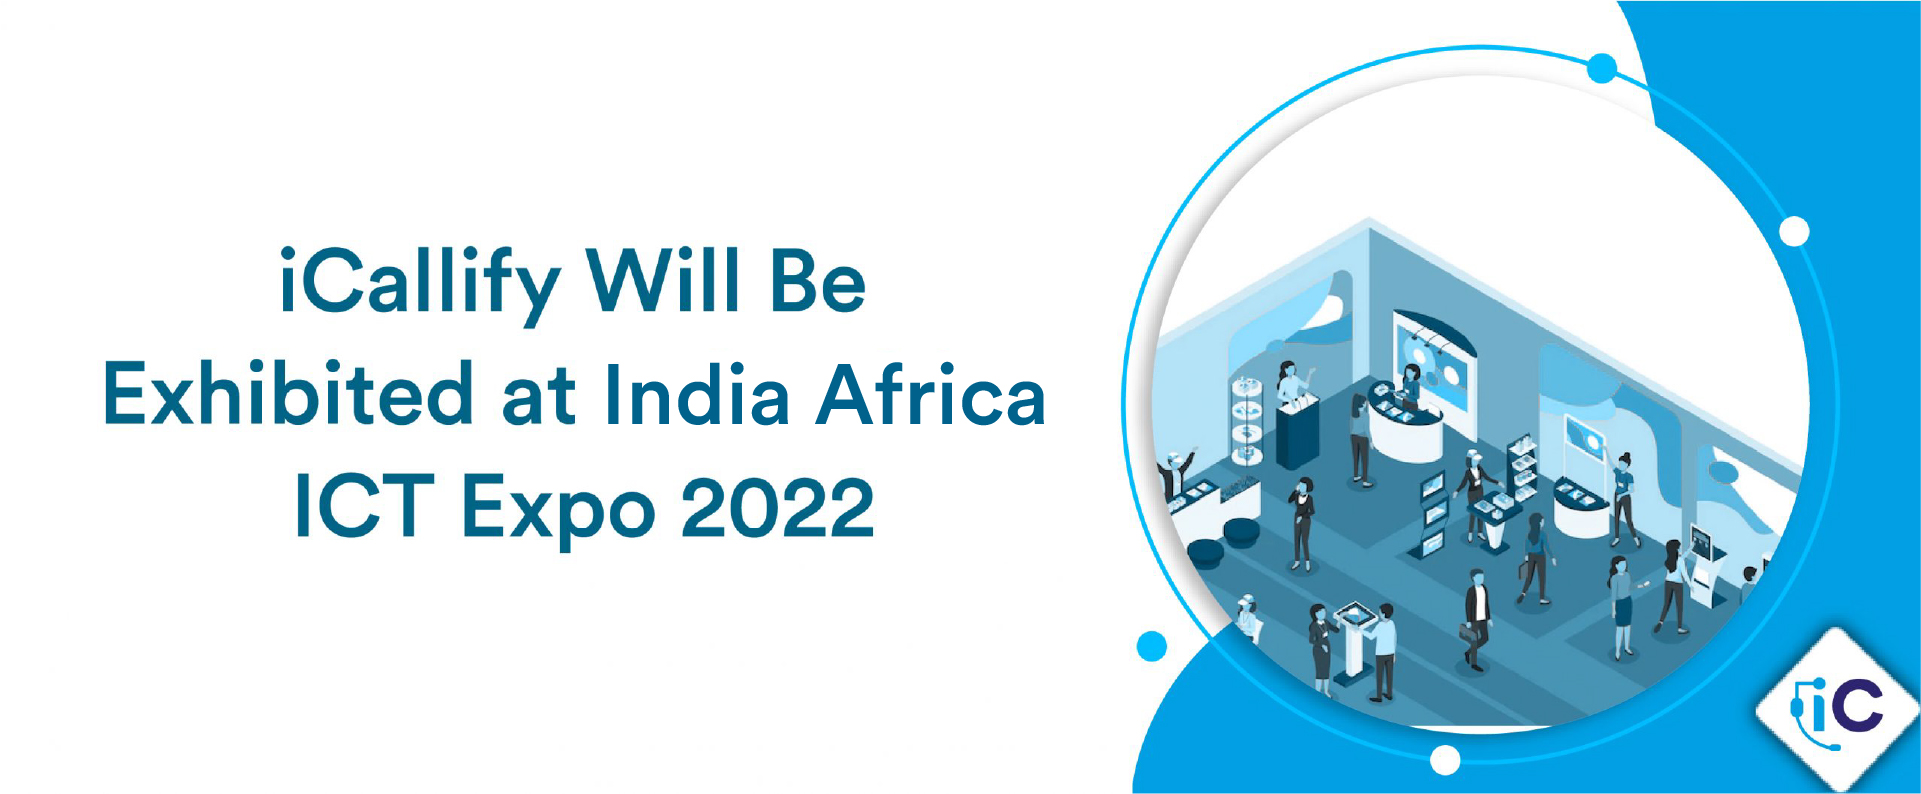 iCallify Will Be Exhibited at India Africa ICT Expo 2022